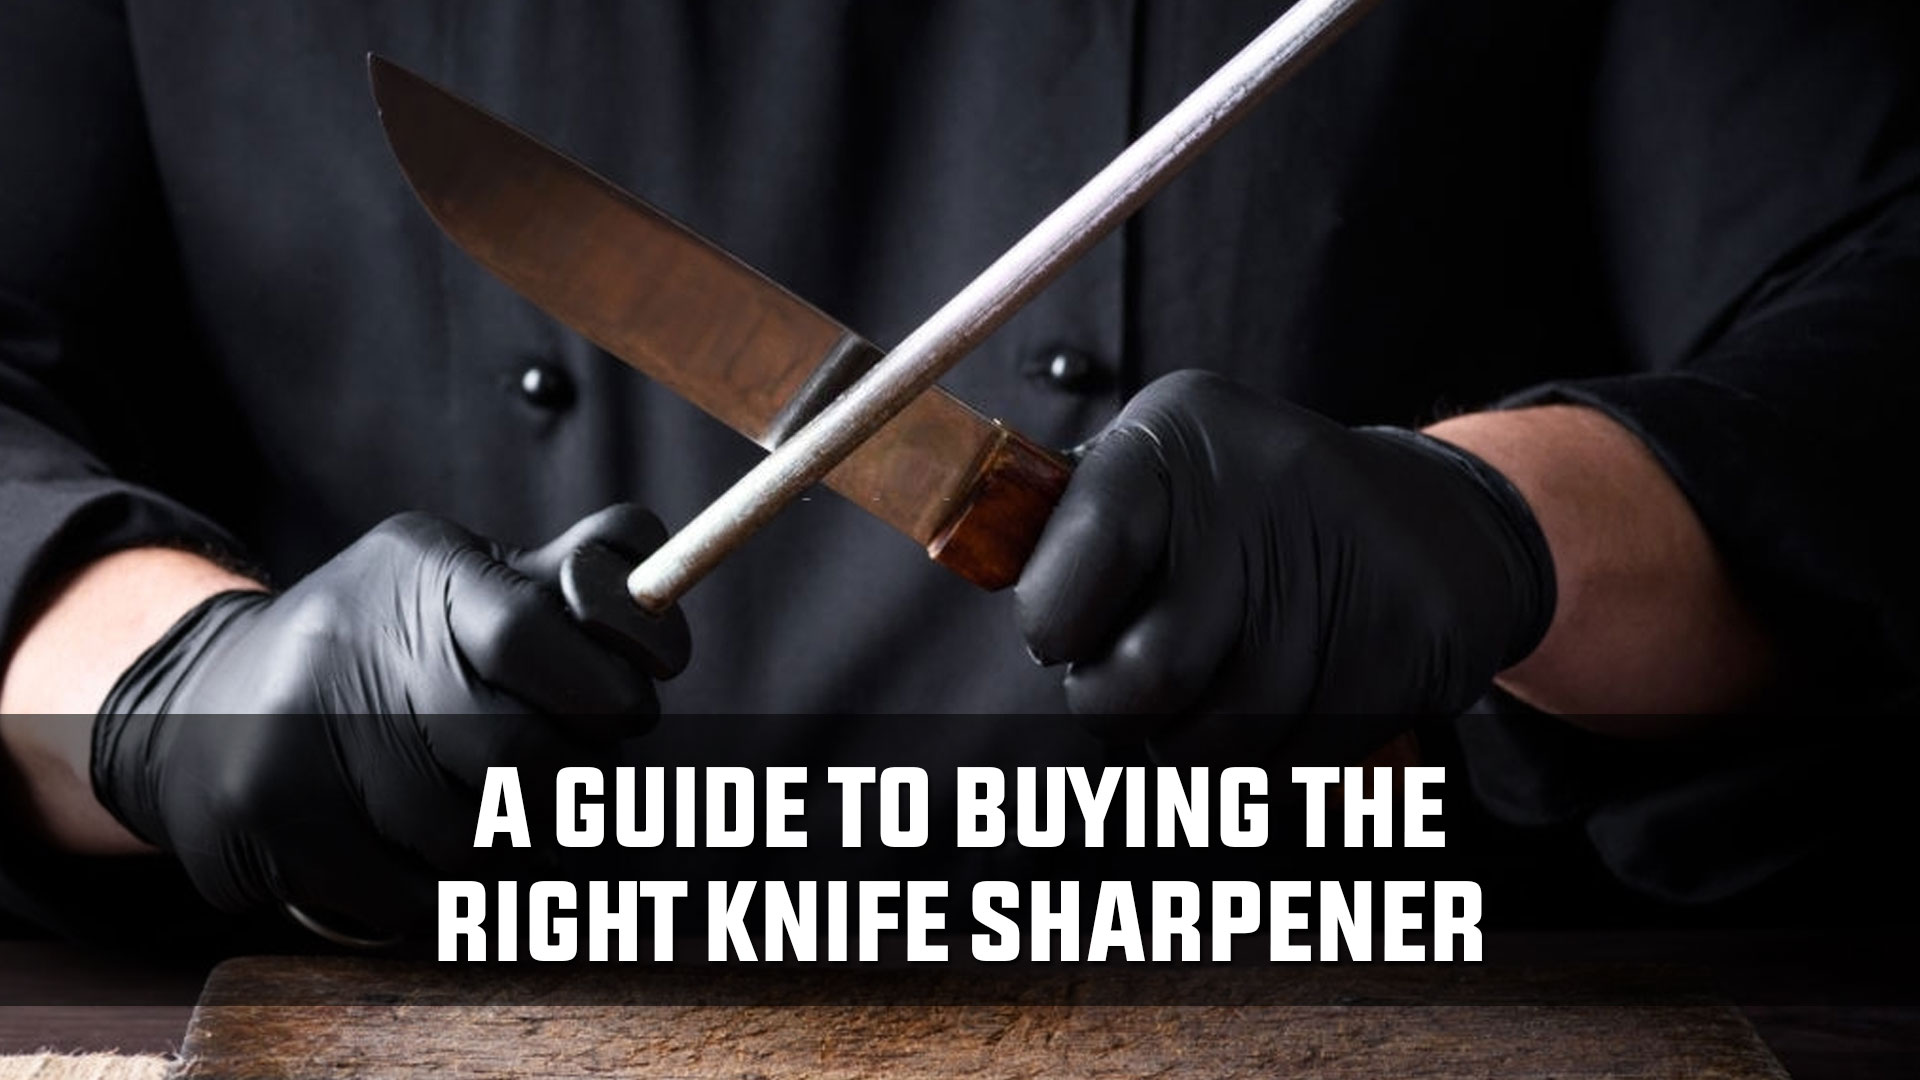 A Guide to Buying the Right Knife Sharpener